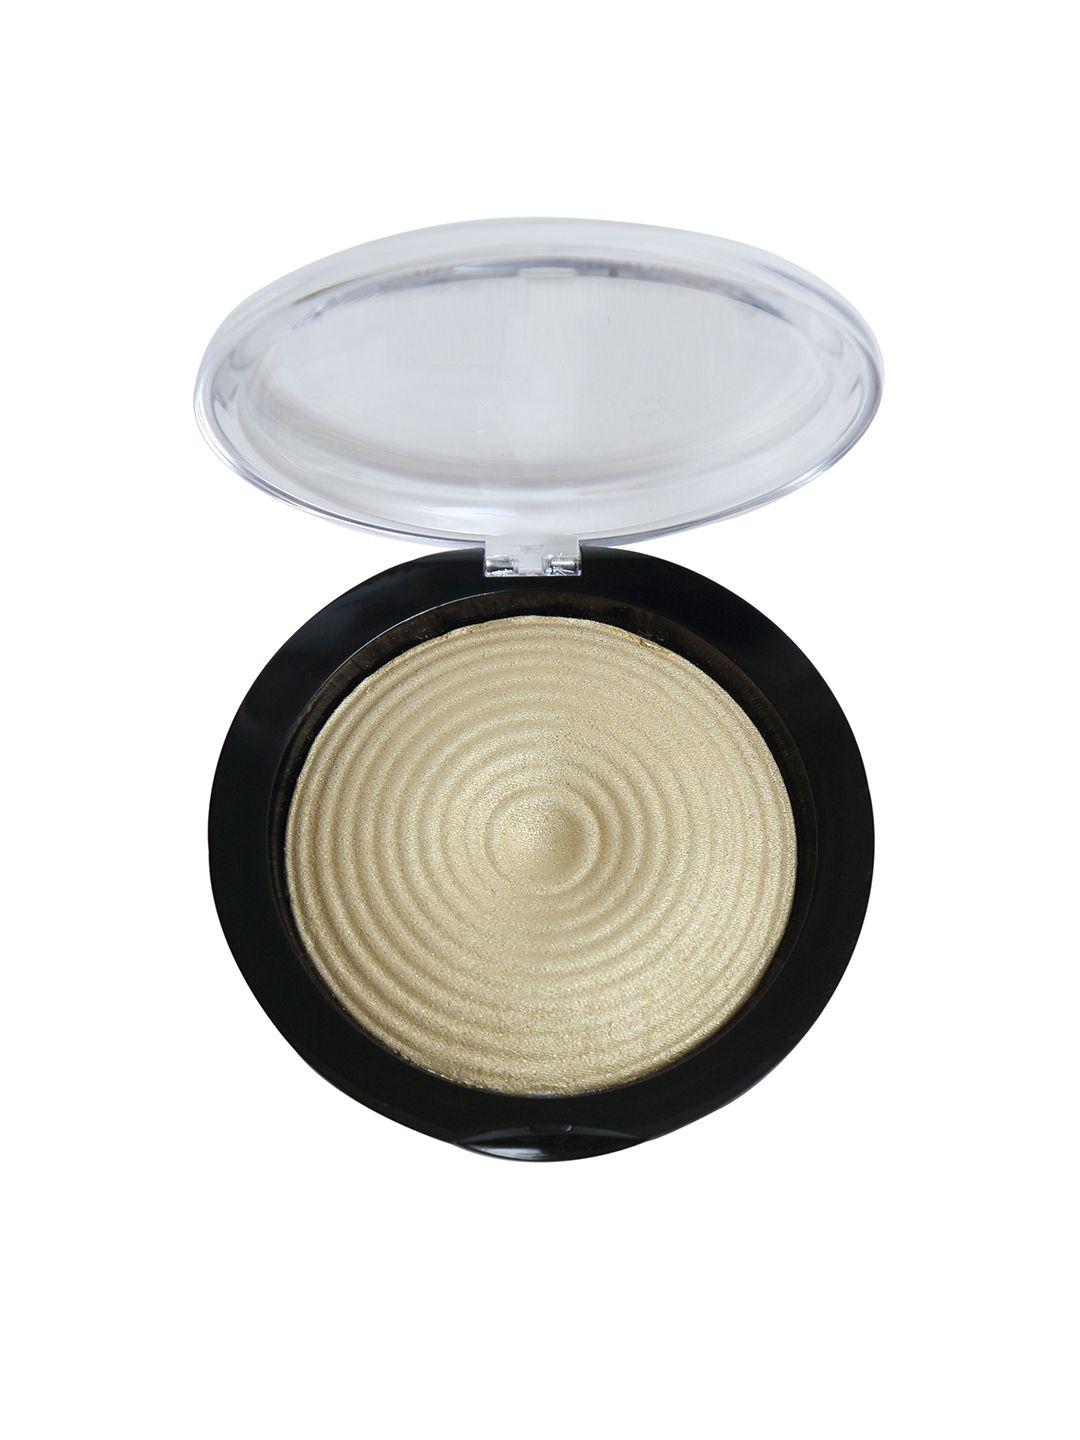 miss-claire-03-baked-highlighter-8-g